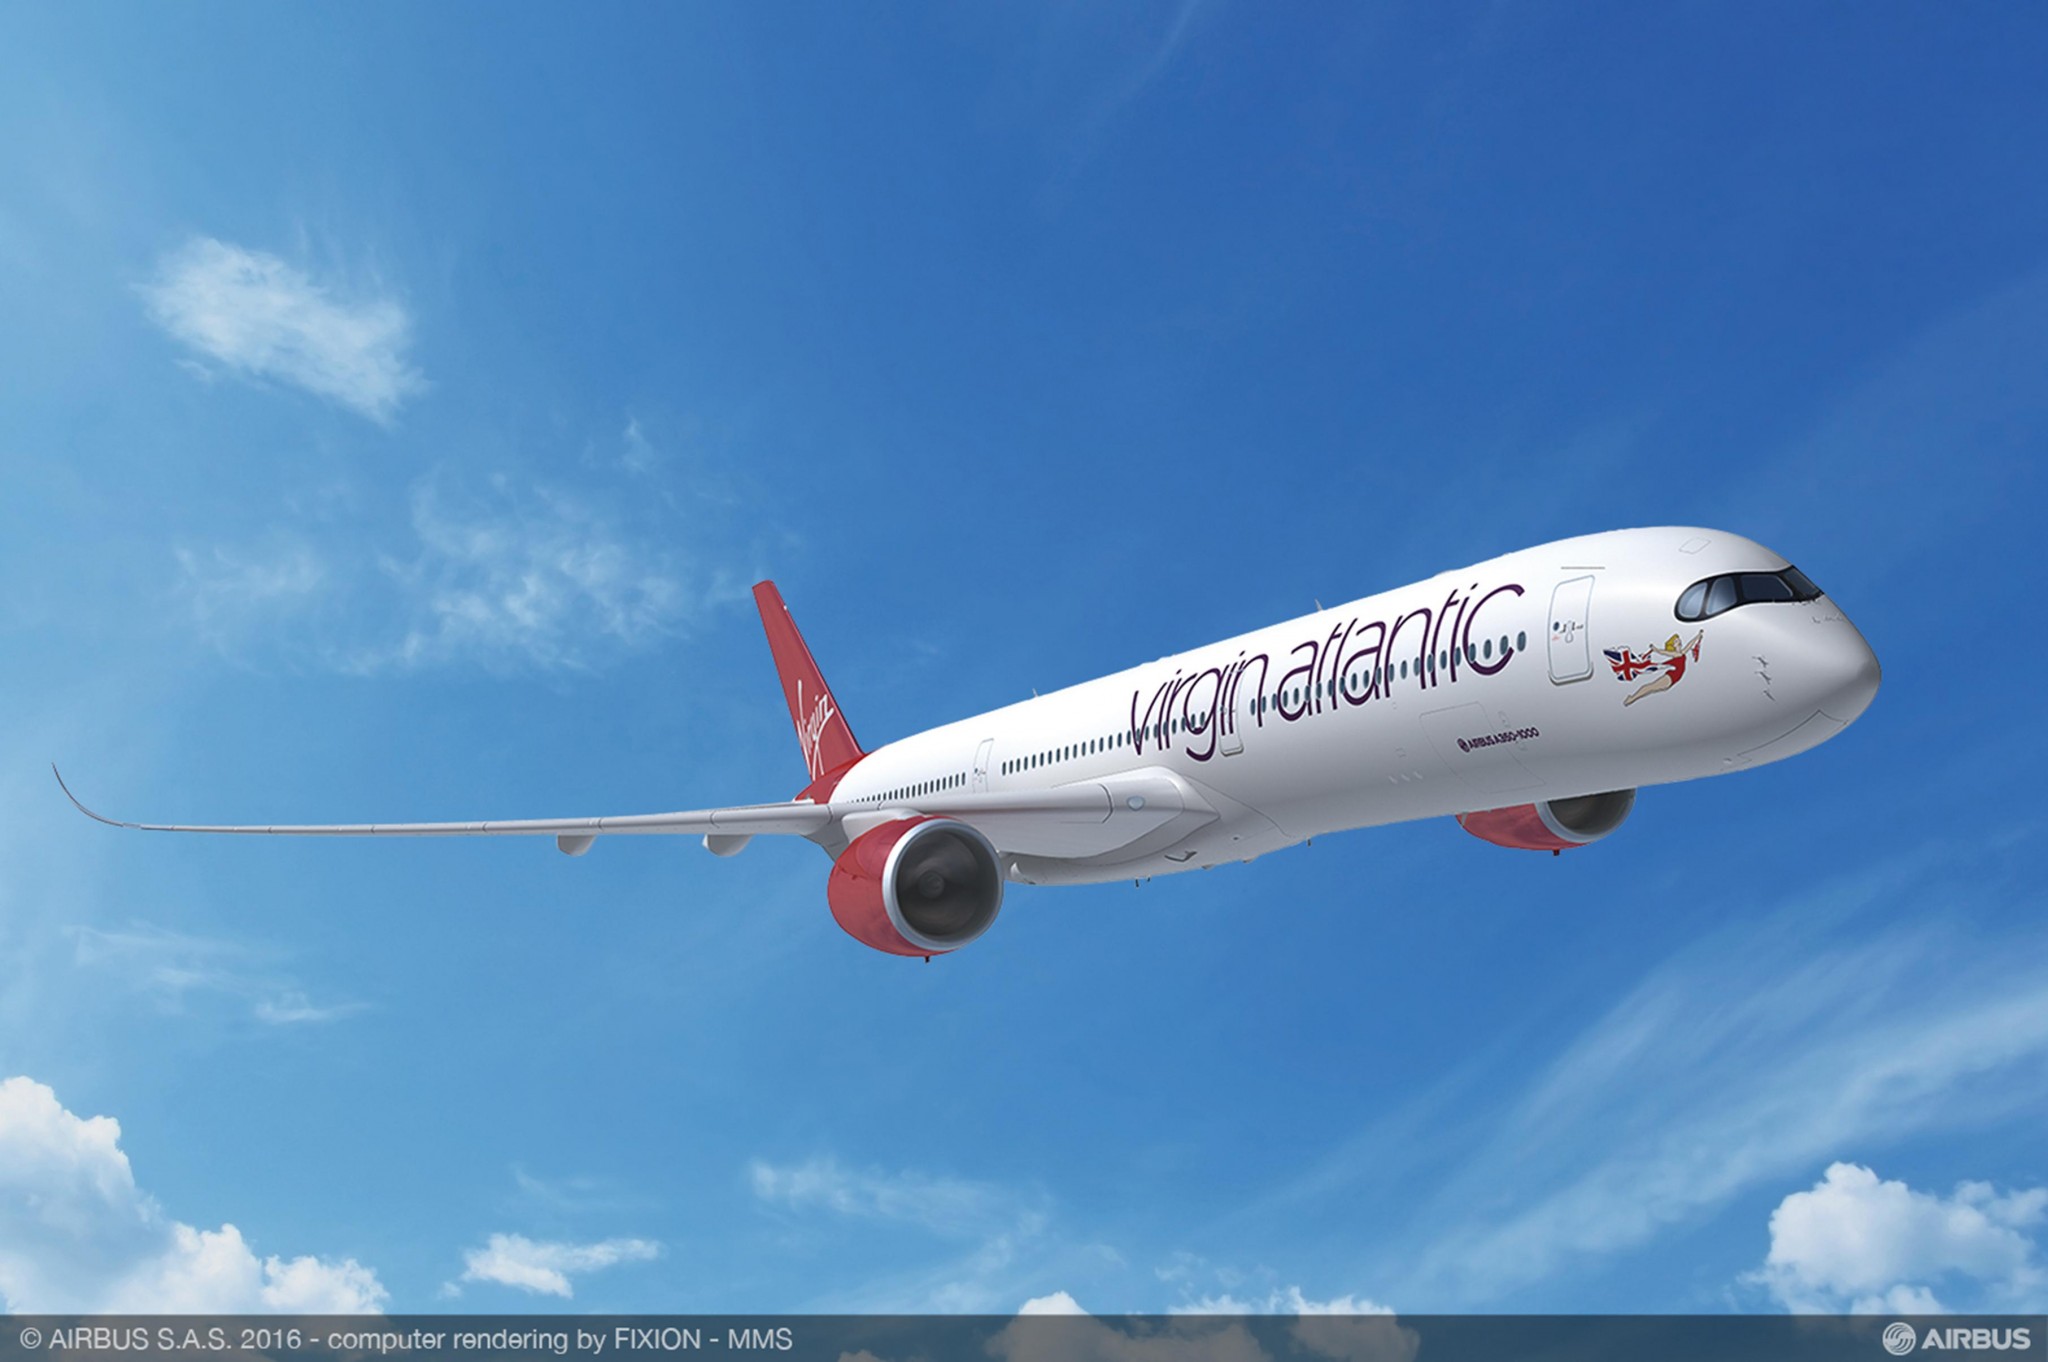 Virgin Atlantic launches only direct flight between London Heathrow and Barbados